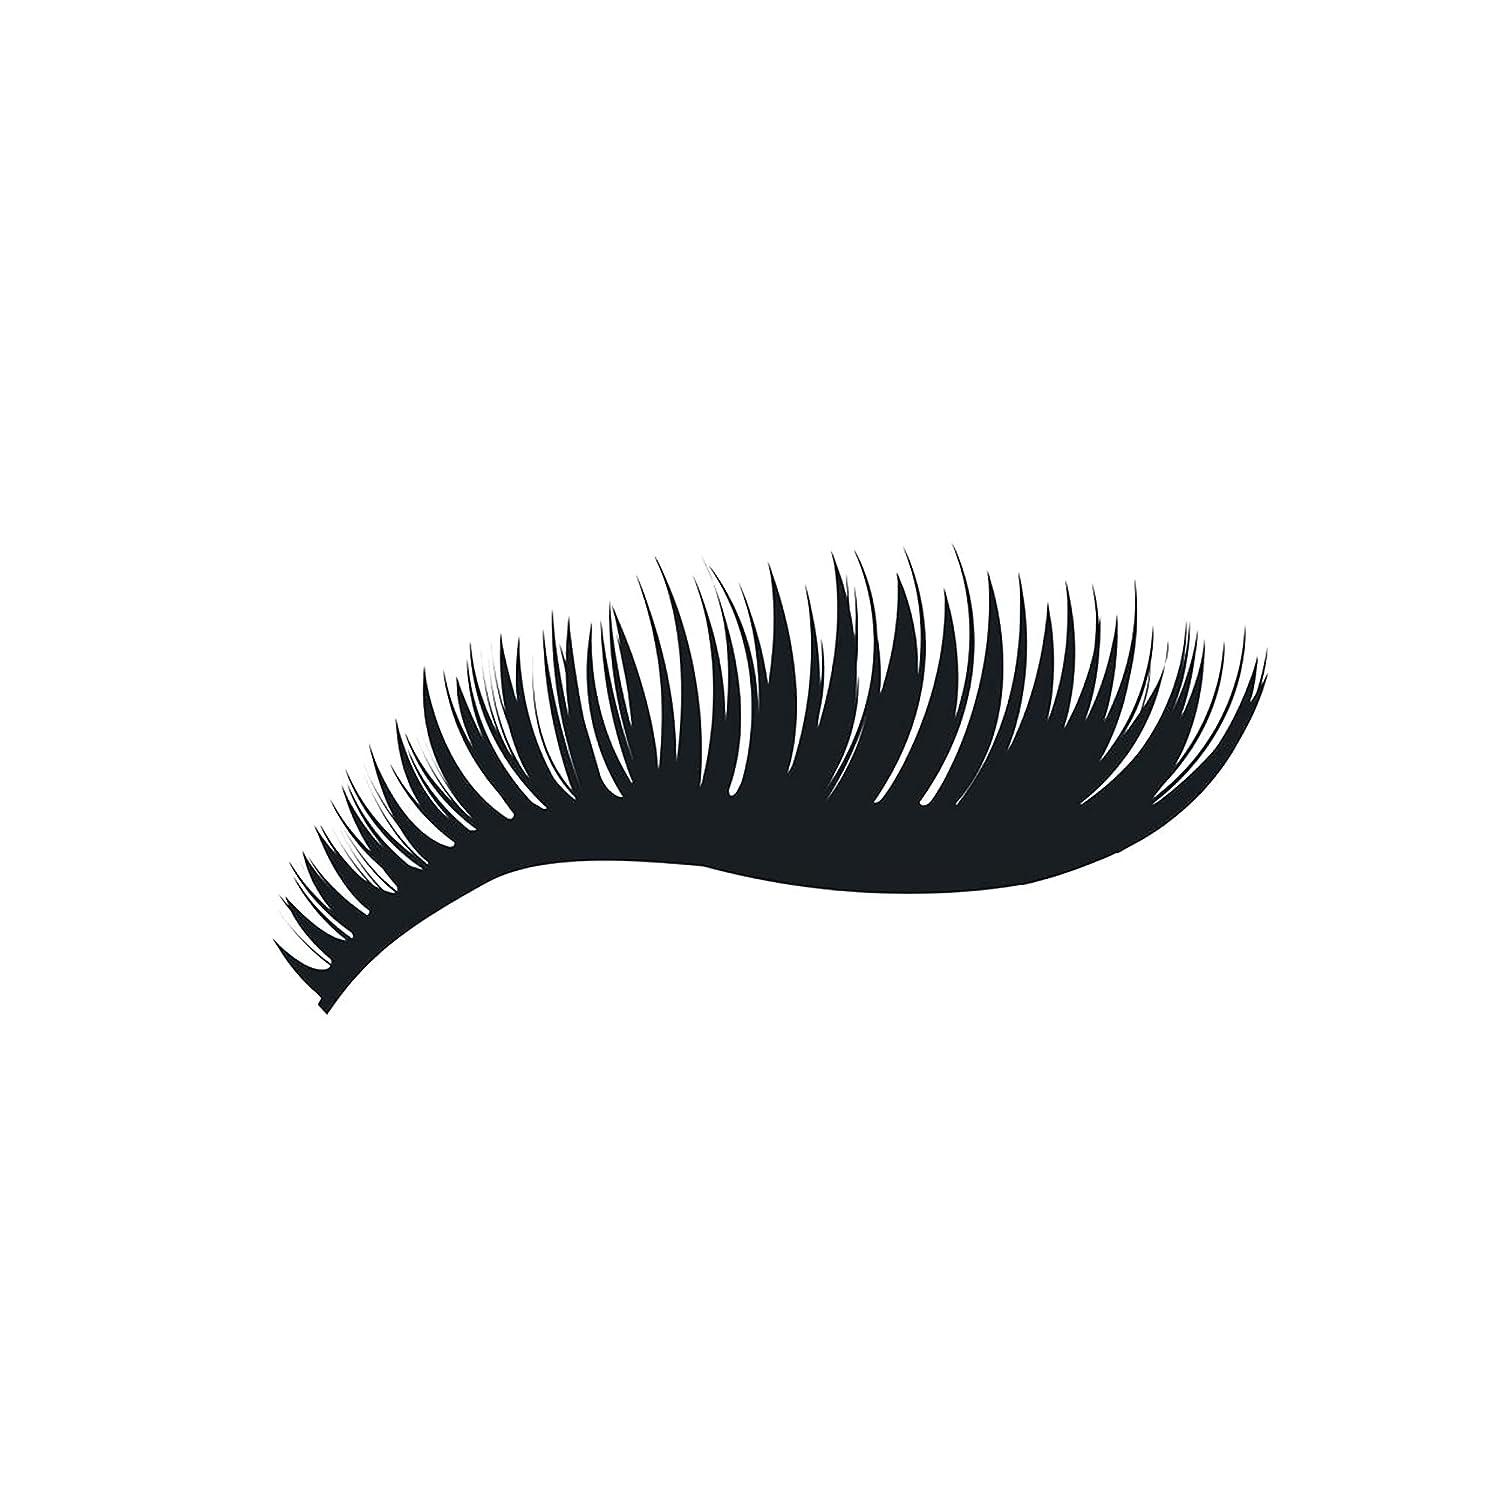 PUPA Milano Vamp! Mascara-For Voluminous And Dramatic Eyelashes-Max  Lengthening And Defining Formula Adds Impact-Boost Your Eye Allure With  Long Thick Lashes-200 Chocolate Brown-0.32 Oz I0111593 Chocolate Brown 0.32  Ounc